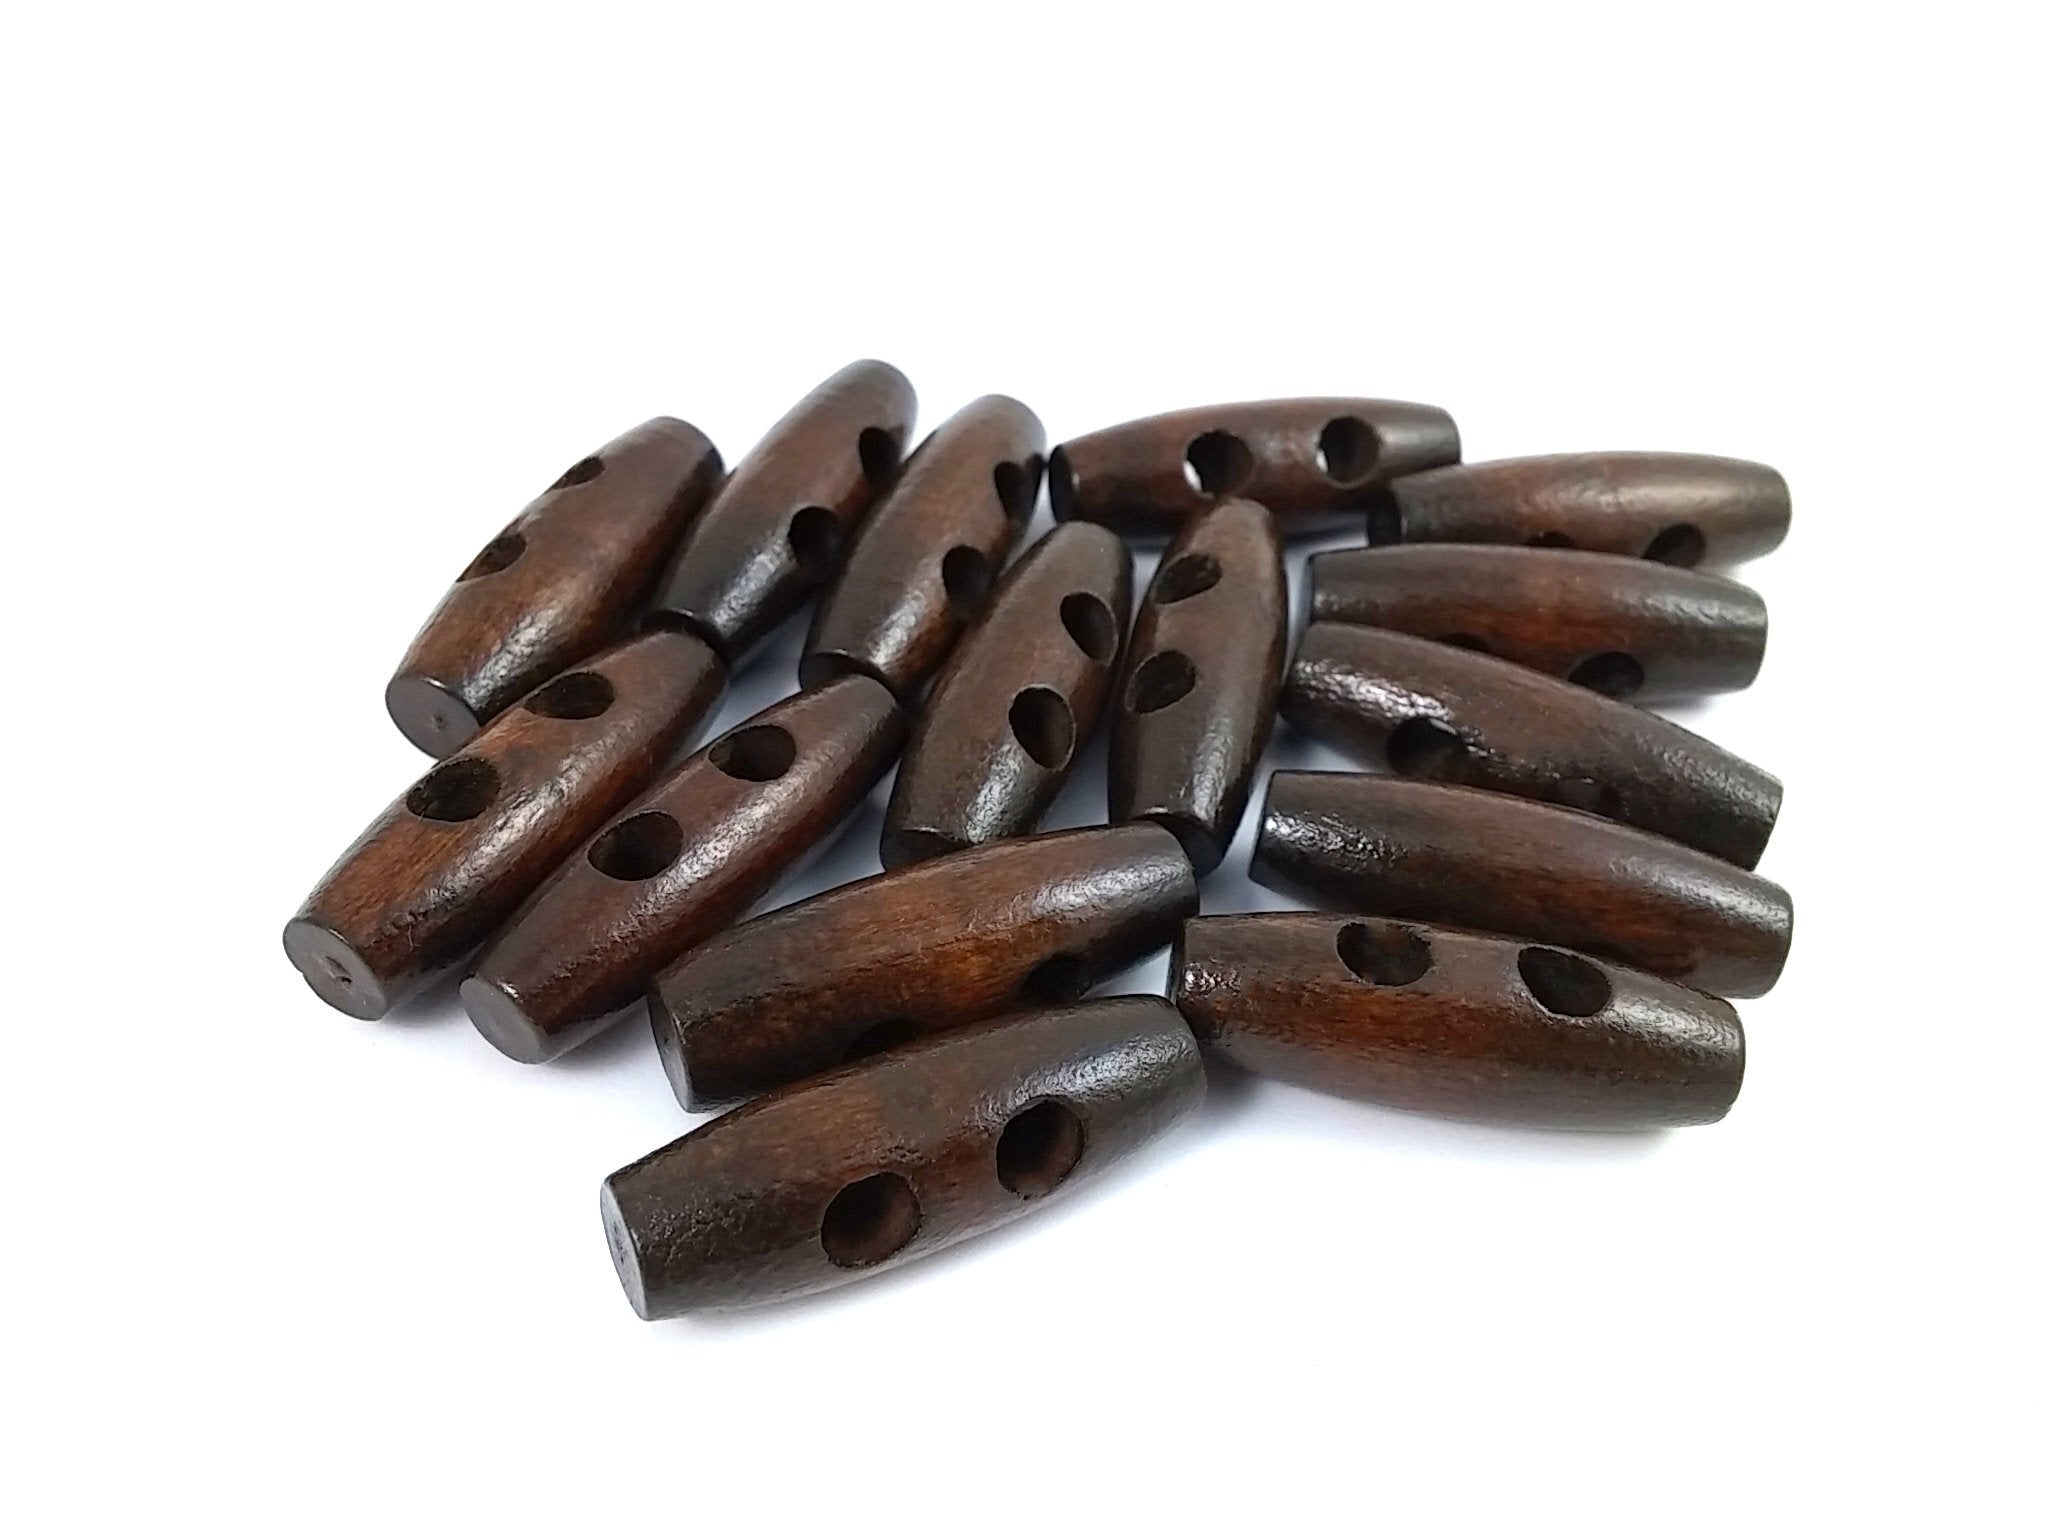 Wholesale wooden Toggle Buttons - Dark Brown 3.5 x 1.1cm - Bulk set of 15